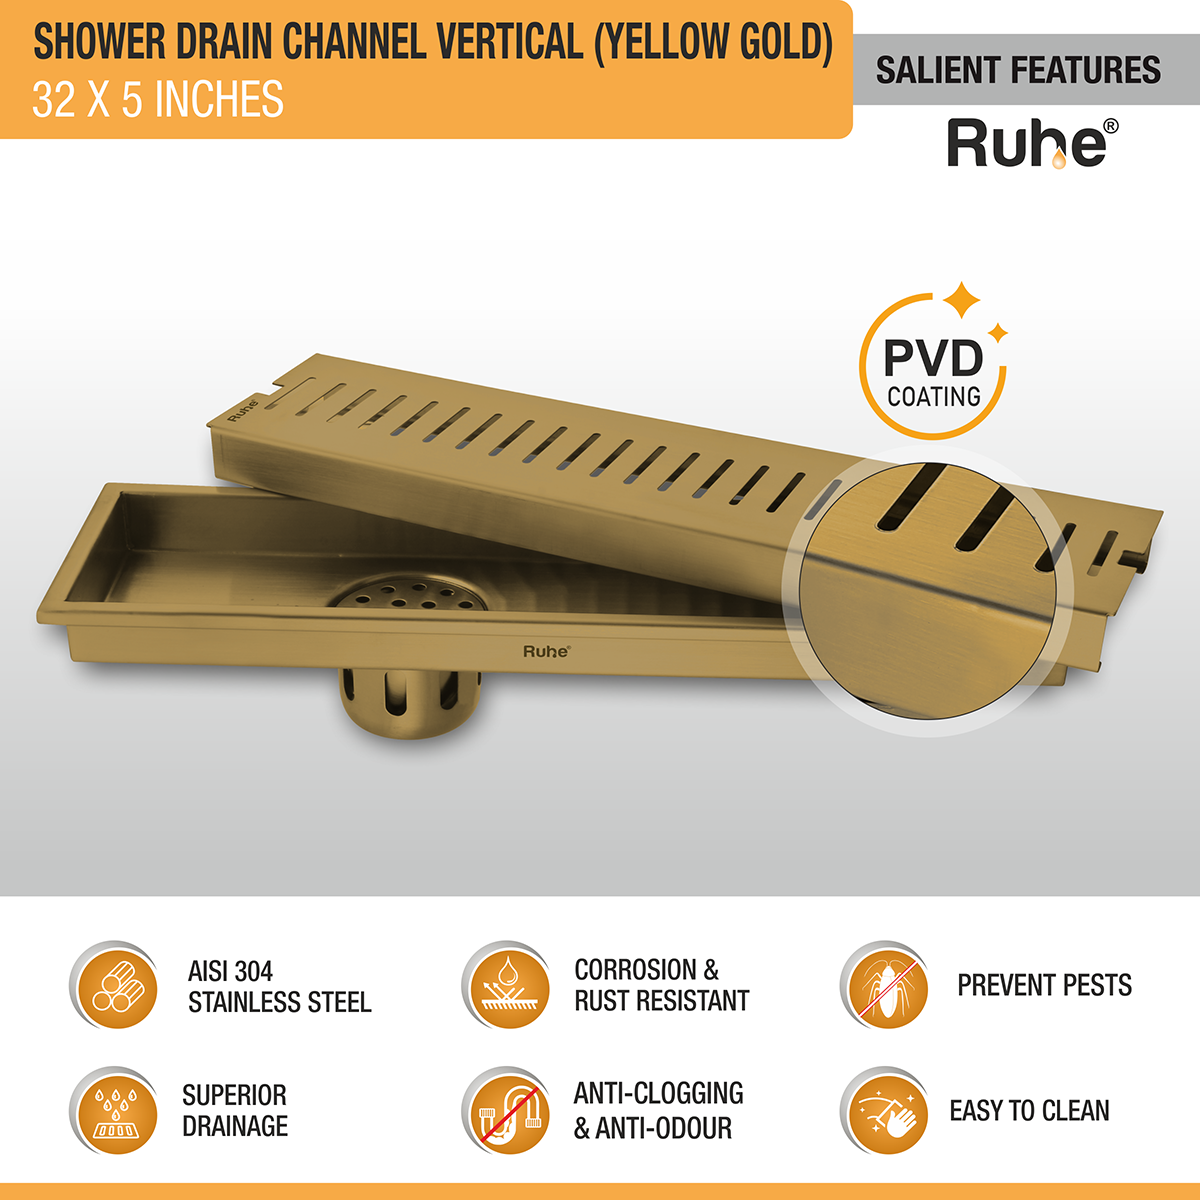 Vertical Shower Drain Channel (32 x 5 Inches) YELLOW GOLD features